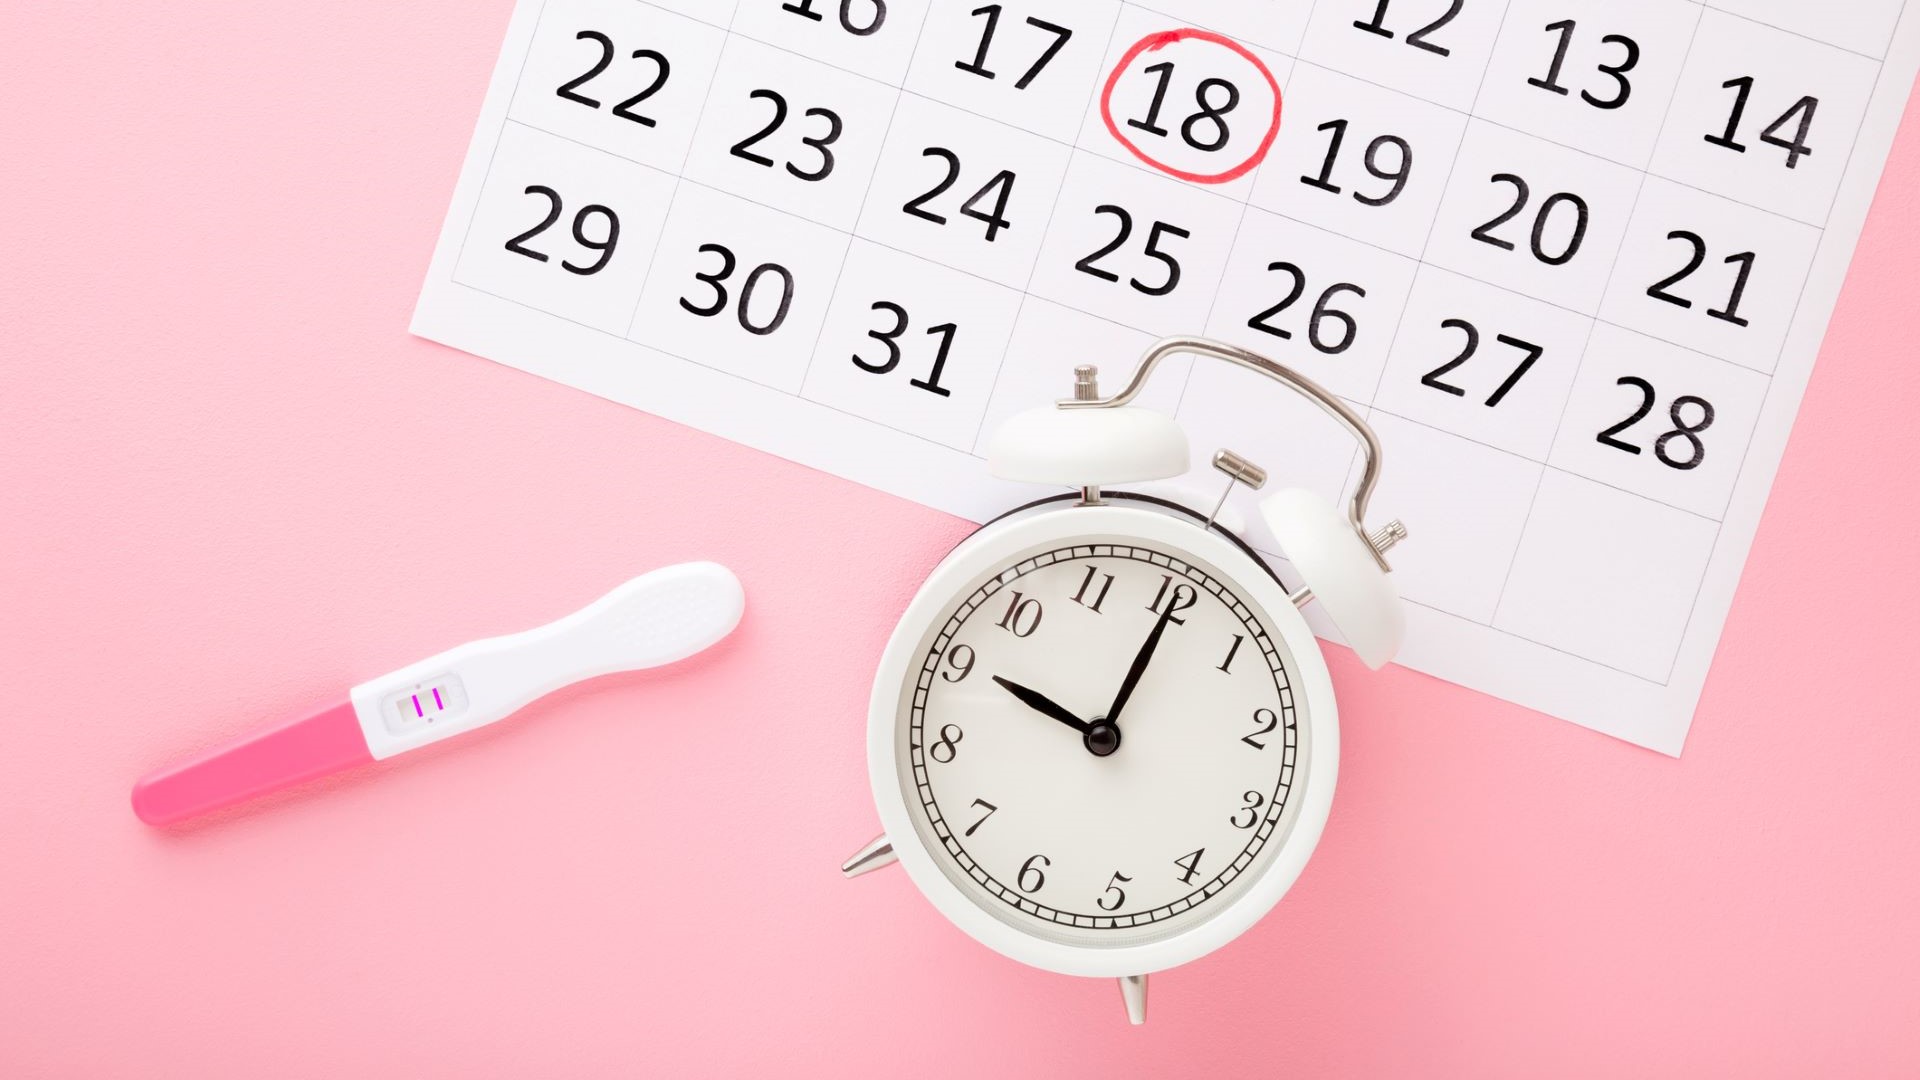 Know Your Fertile Days to Get Pregnant Sooner: 5 Best Methods Explained